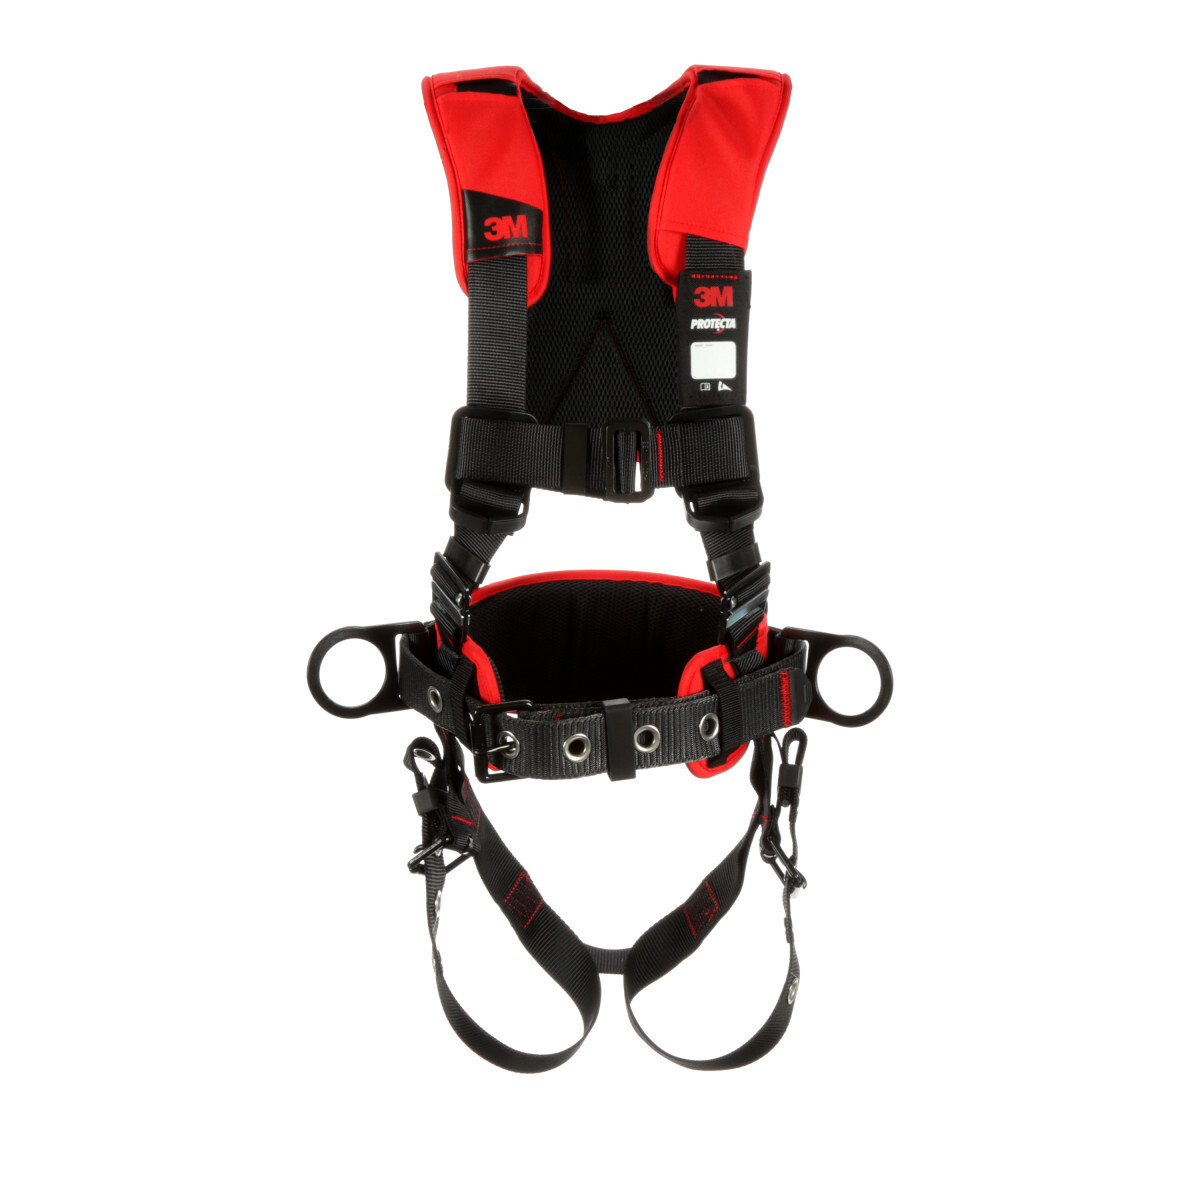 Protecta Comfort Construction-Style Positioning Harness 1161205